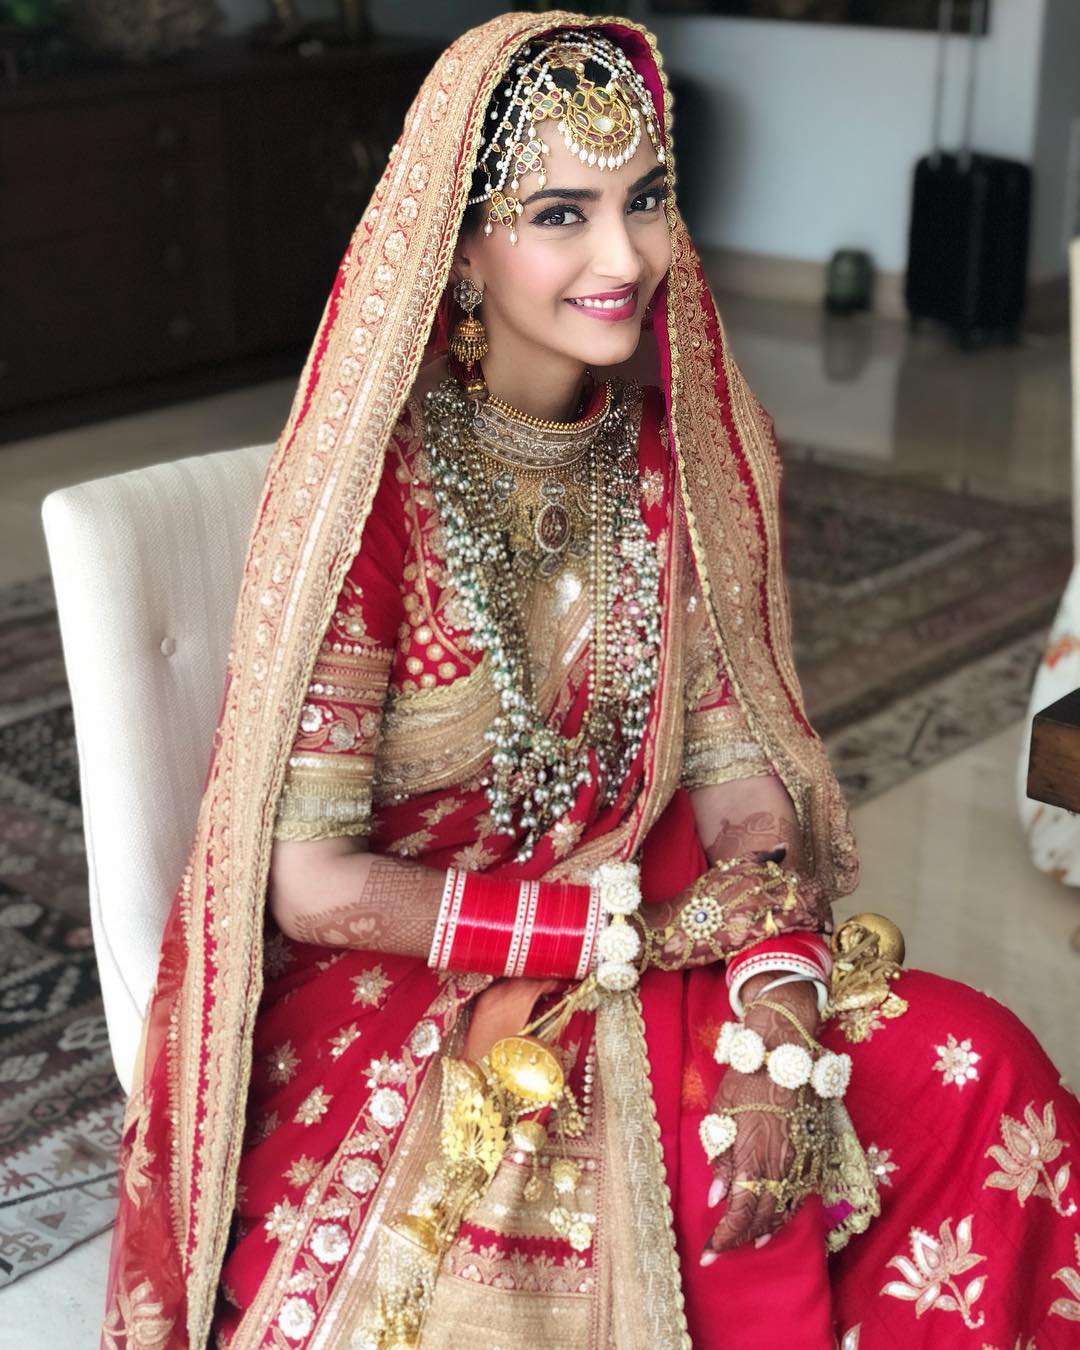 Should we buy a wedding lehenga for 50k or more worth when you cannot wear  it again? - Quora